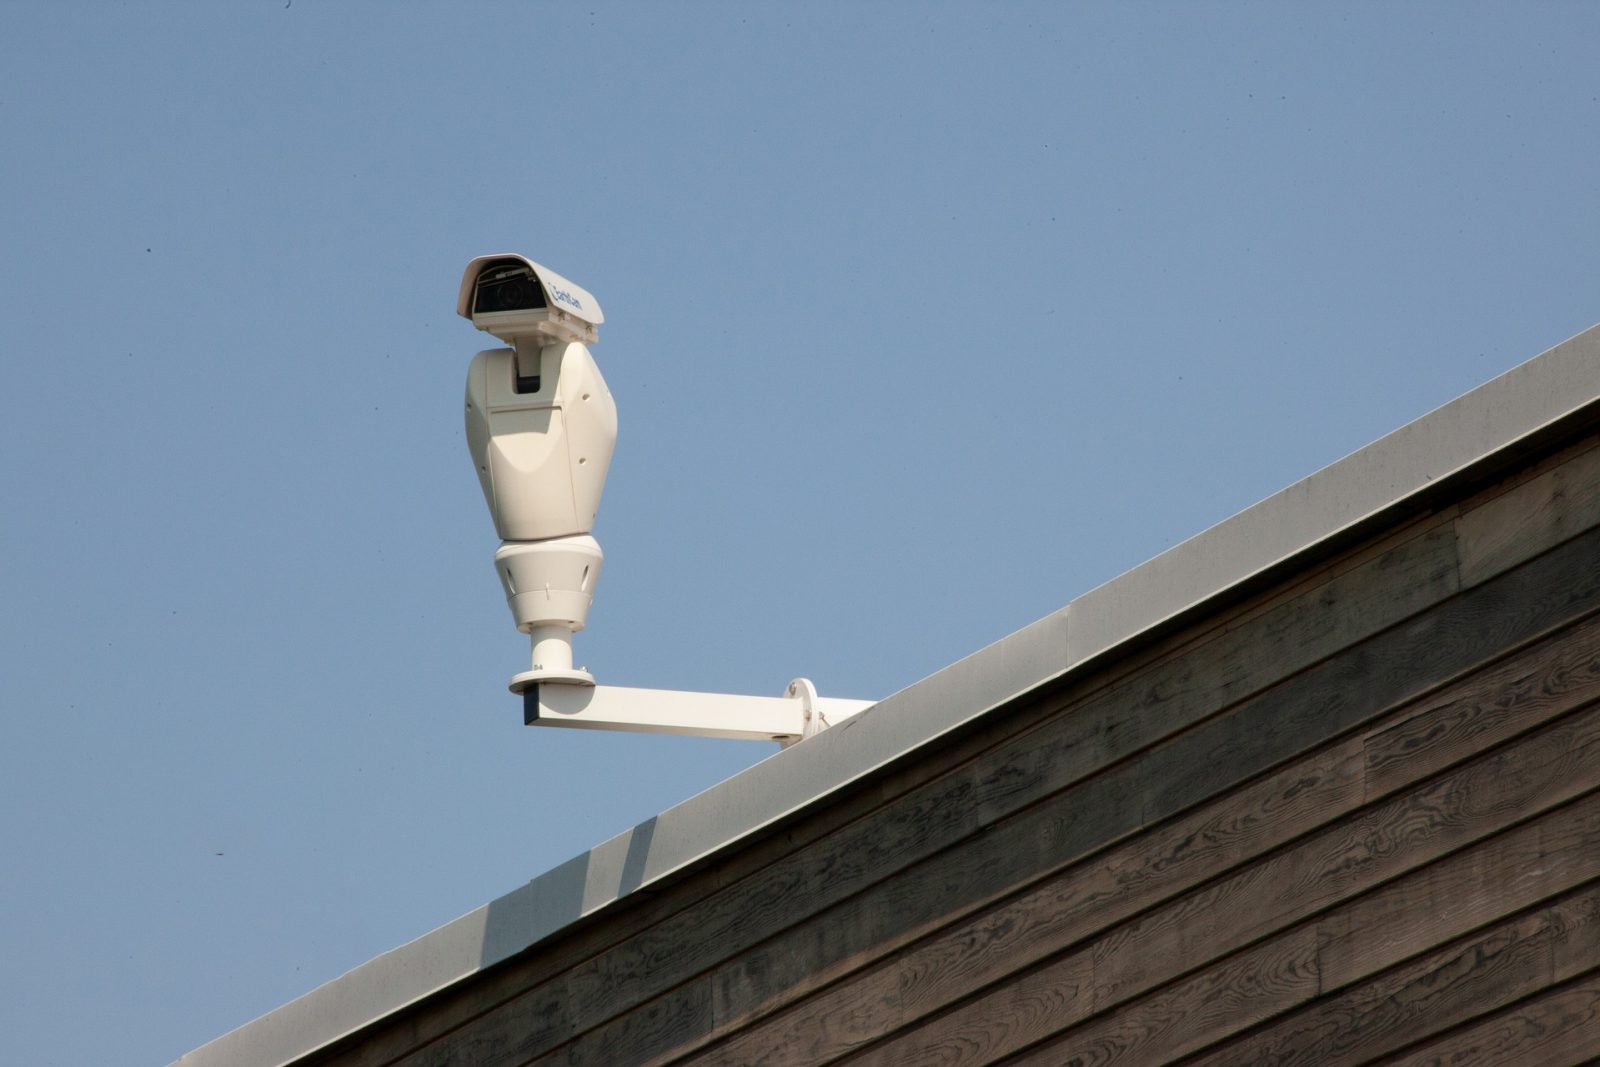 Video Surveillance System and Cloud Computing 7